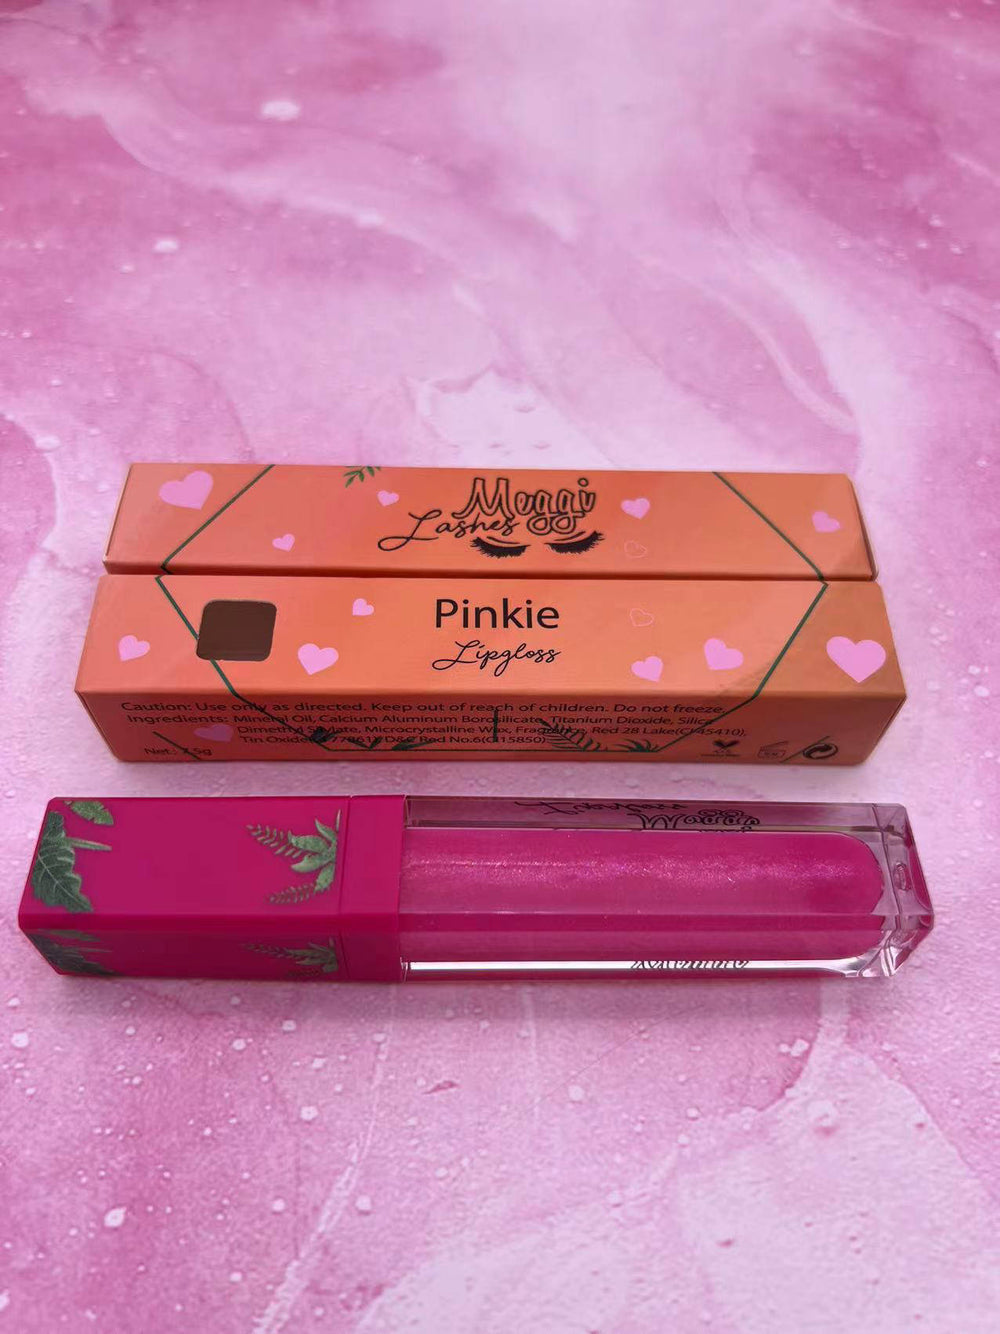 Pinkie Lip Gloss (Amber collection)